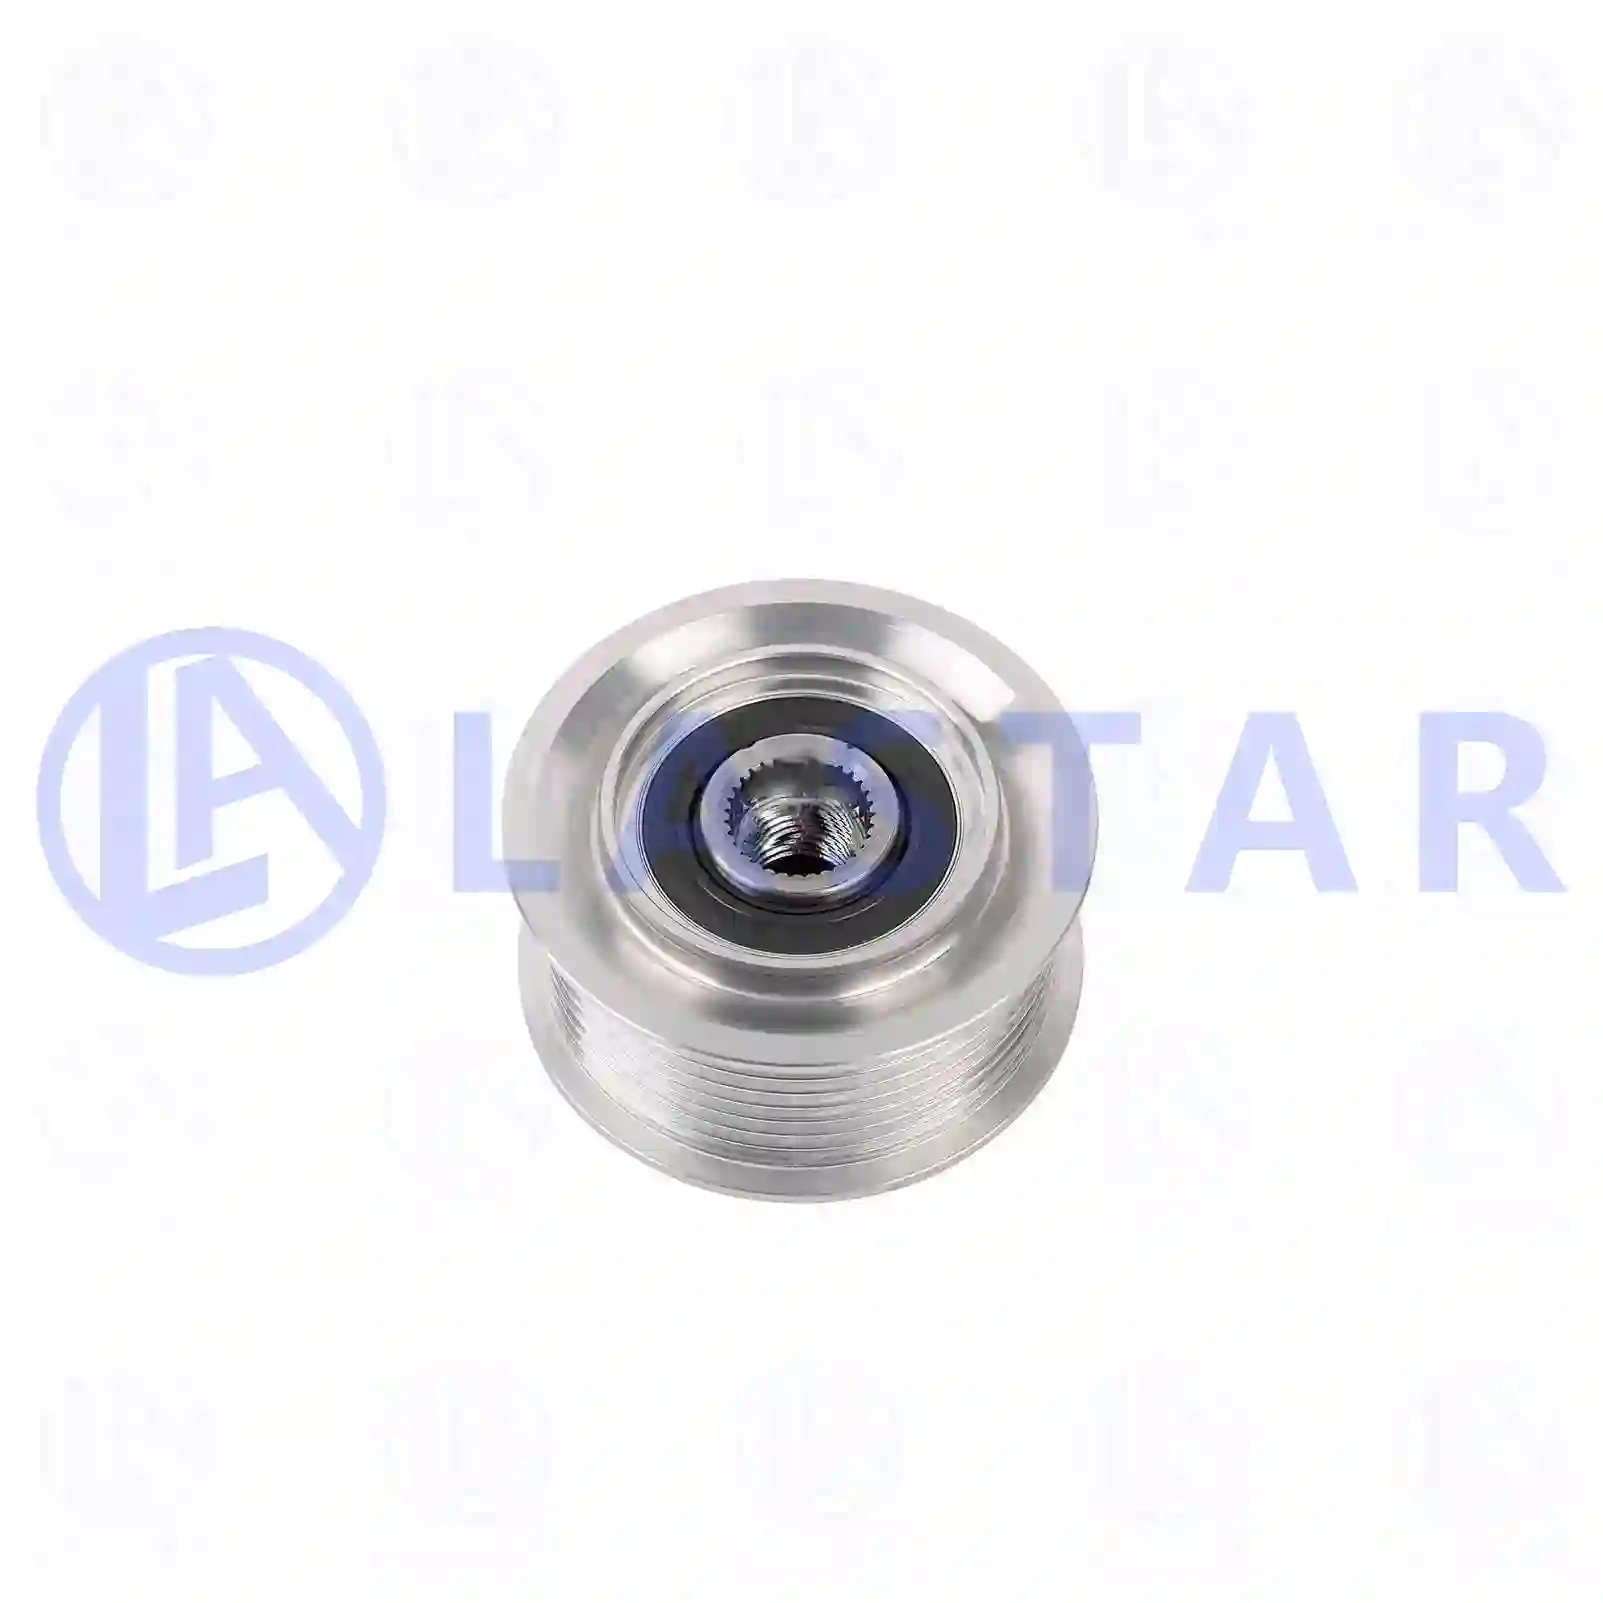 Pulley, 77711645, 9061550315, 9061551315, 9061552115, ||  77711645 Lastar Spare Part | Truck Spare Parts, Auotomotive Spare Parts Pulley, 77711645, 9061550315, 9061551315, 9061552115, ||  77711645 Lastar Spare Part | Truck Spare Parts, Auotomotive Spare Parts